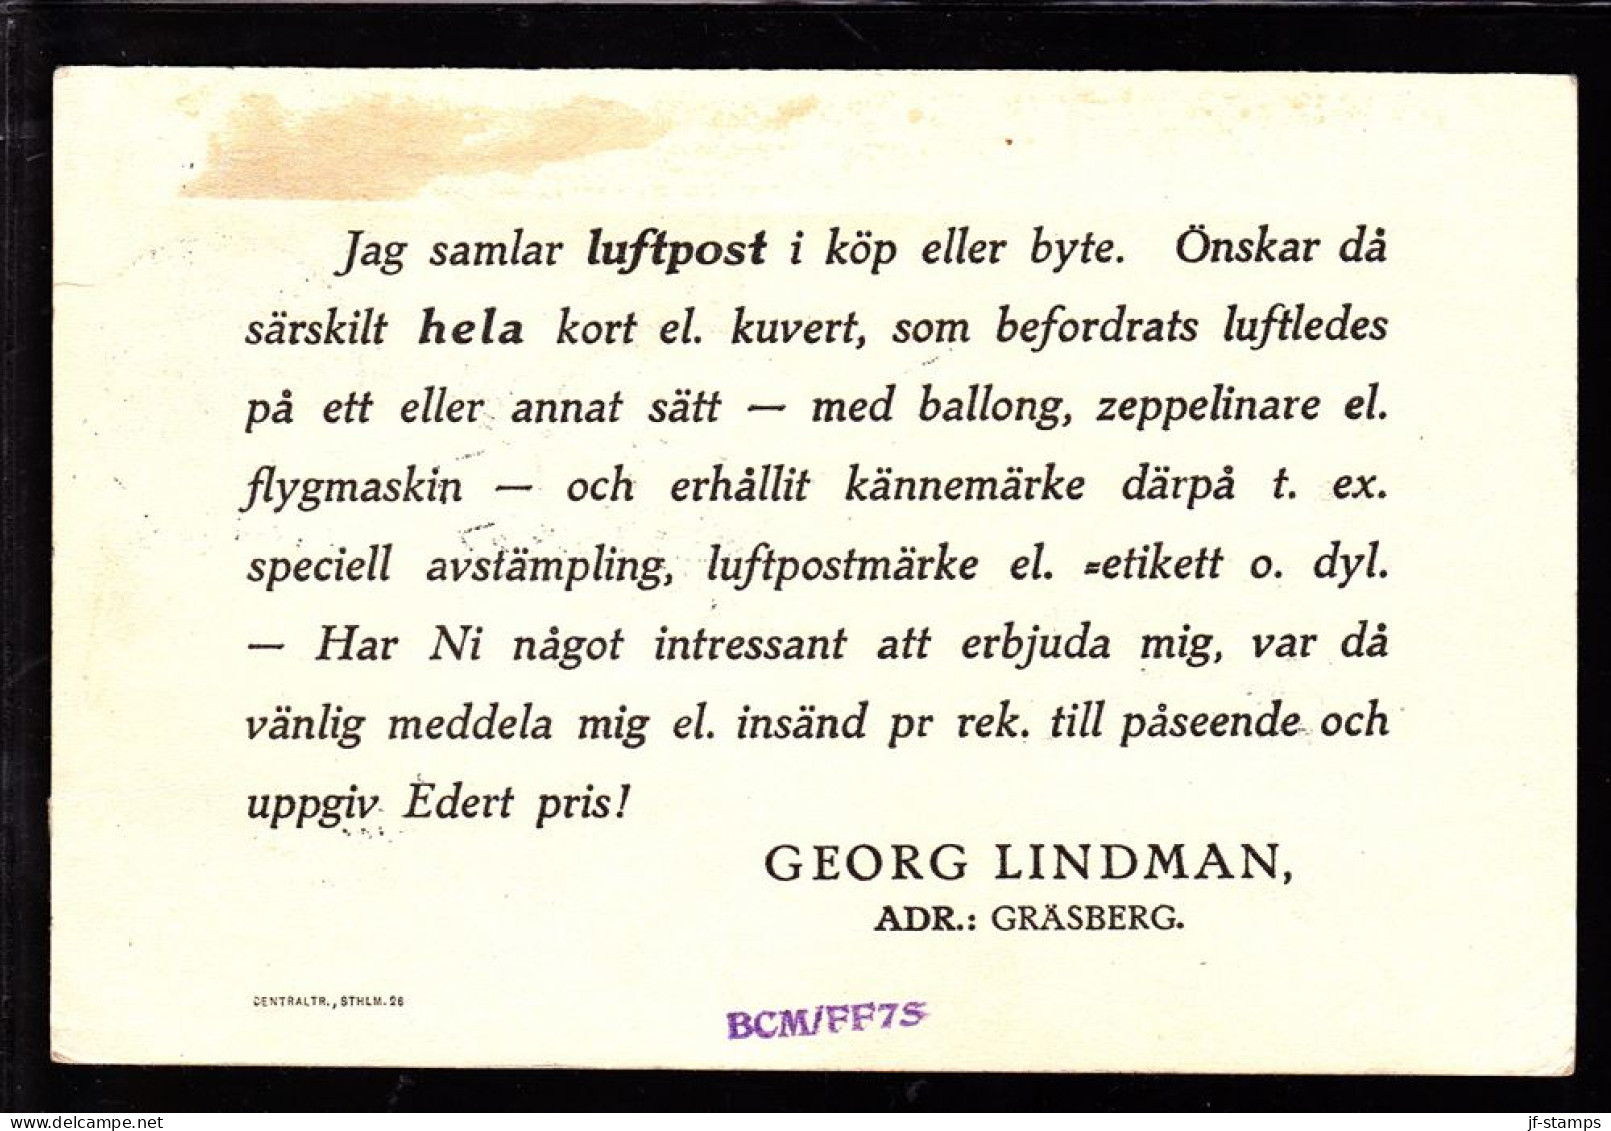 1928. Air Mail. 15 øre Lilac And 10 øre Green. KØBENHAVN LUFTPOST 2 29.8.28 AIR POST OFFICE S... (Michel 144) - JF103839 - Luftpost